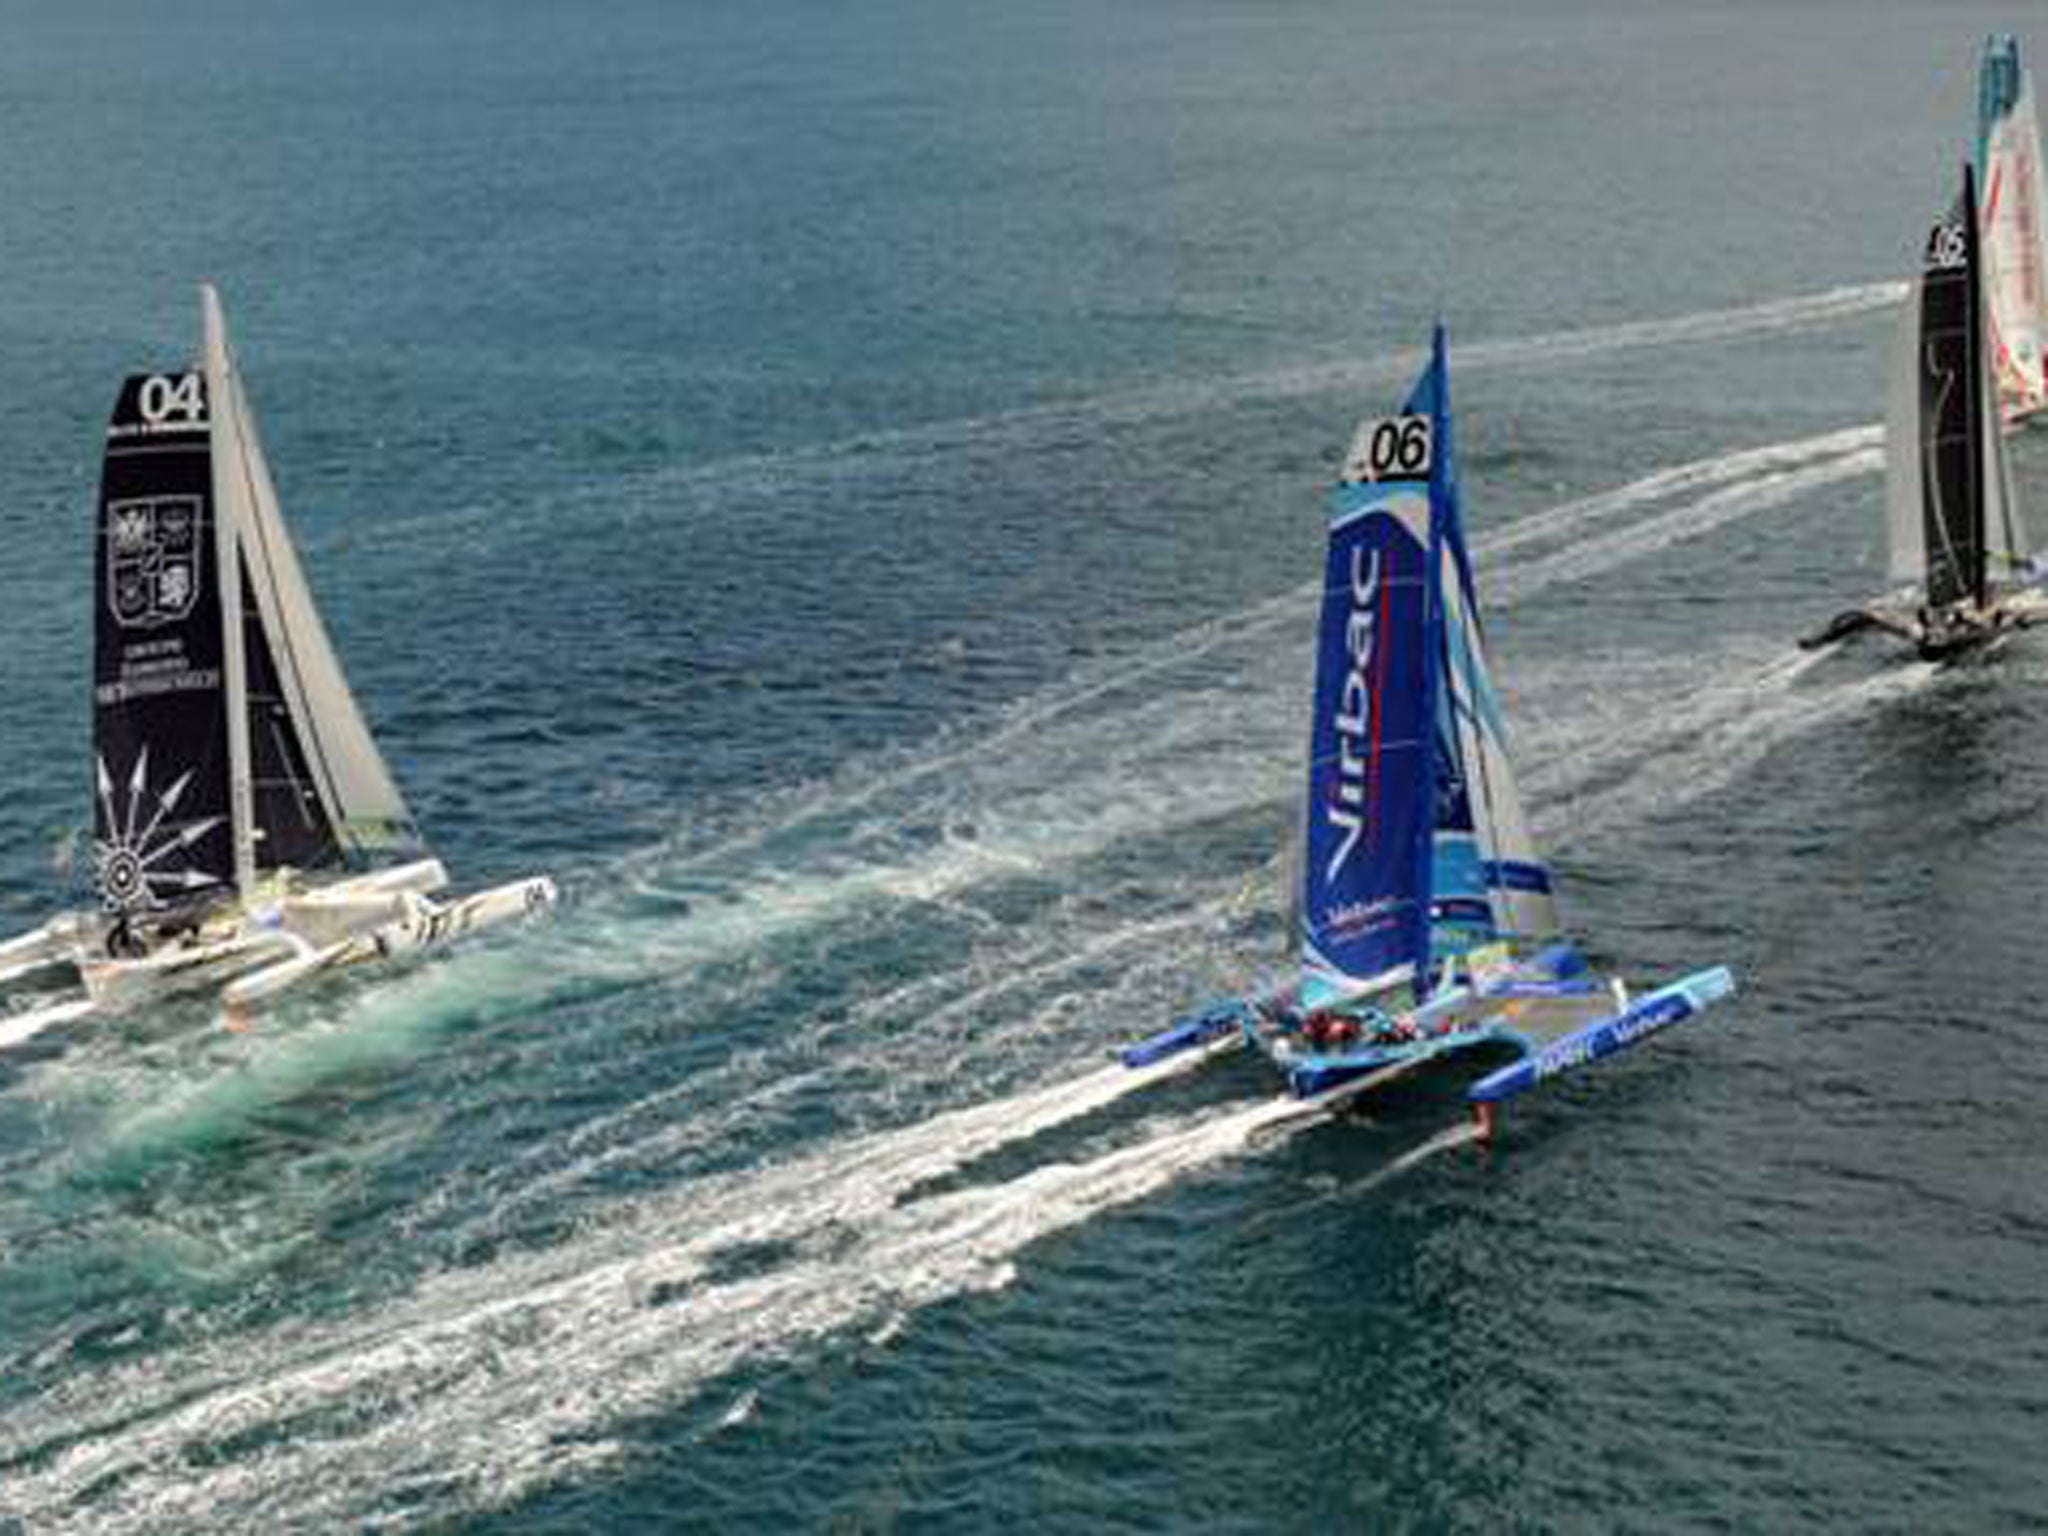 The multihulls made a fast exit from Valencia on the first leg of the Route des Princes from Valencia to Lisbon.